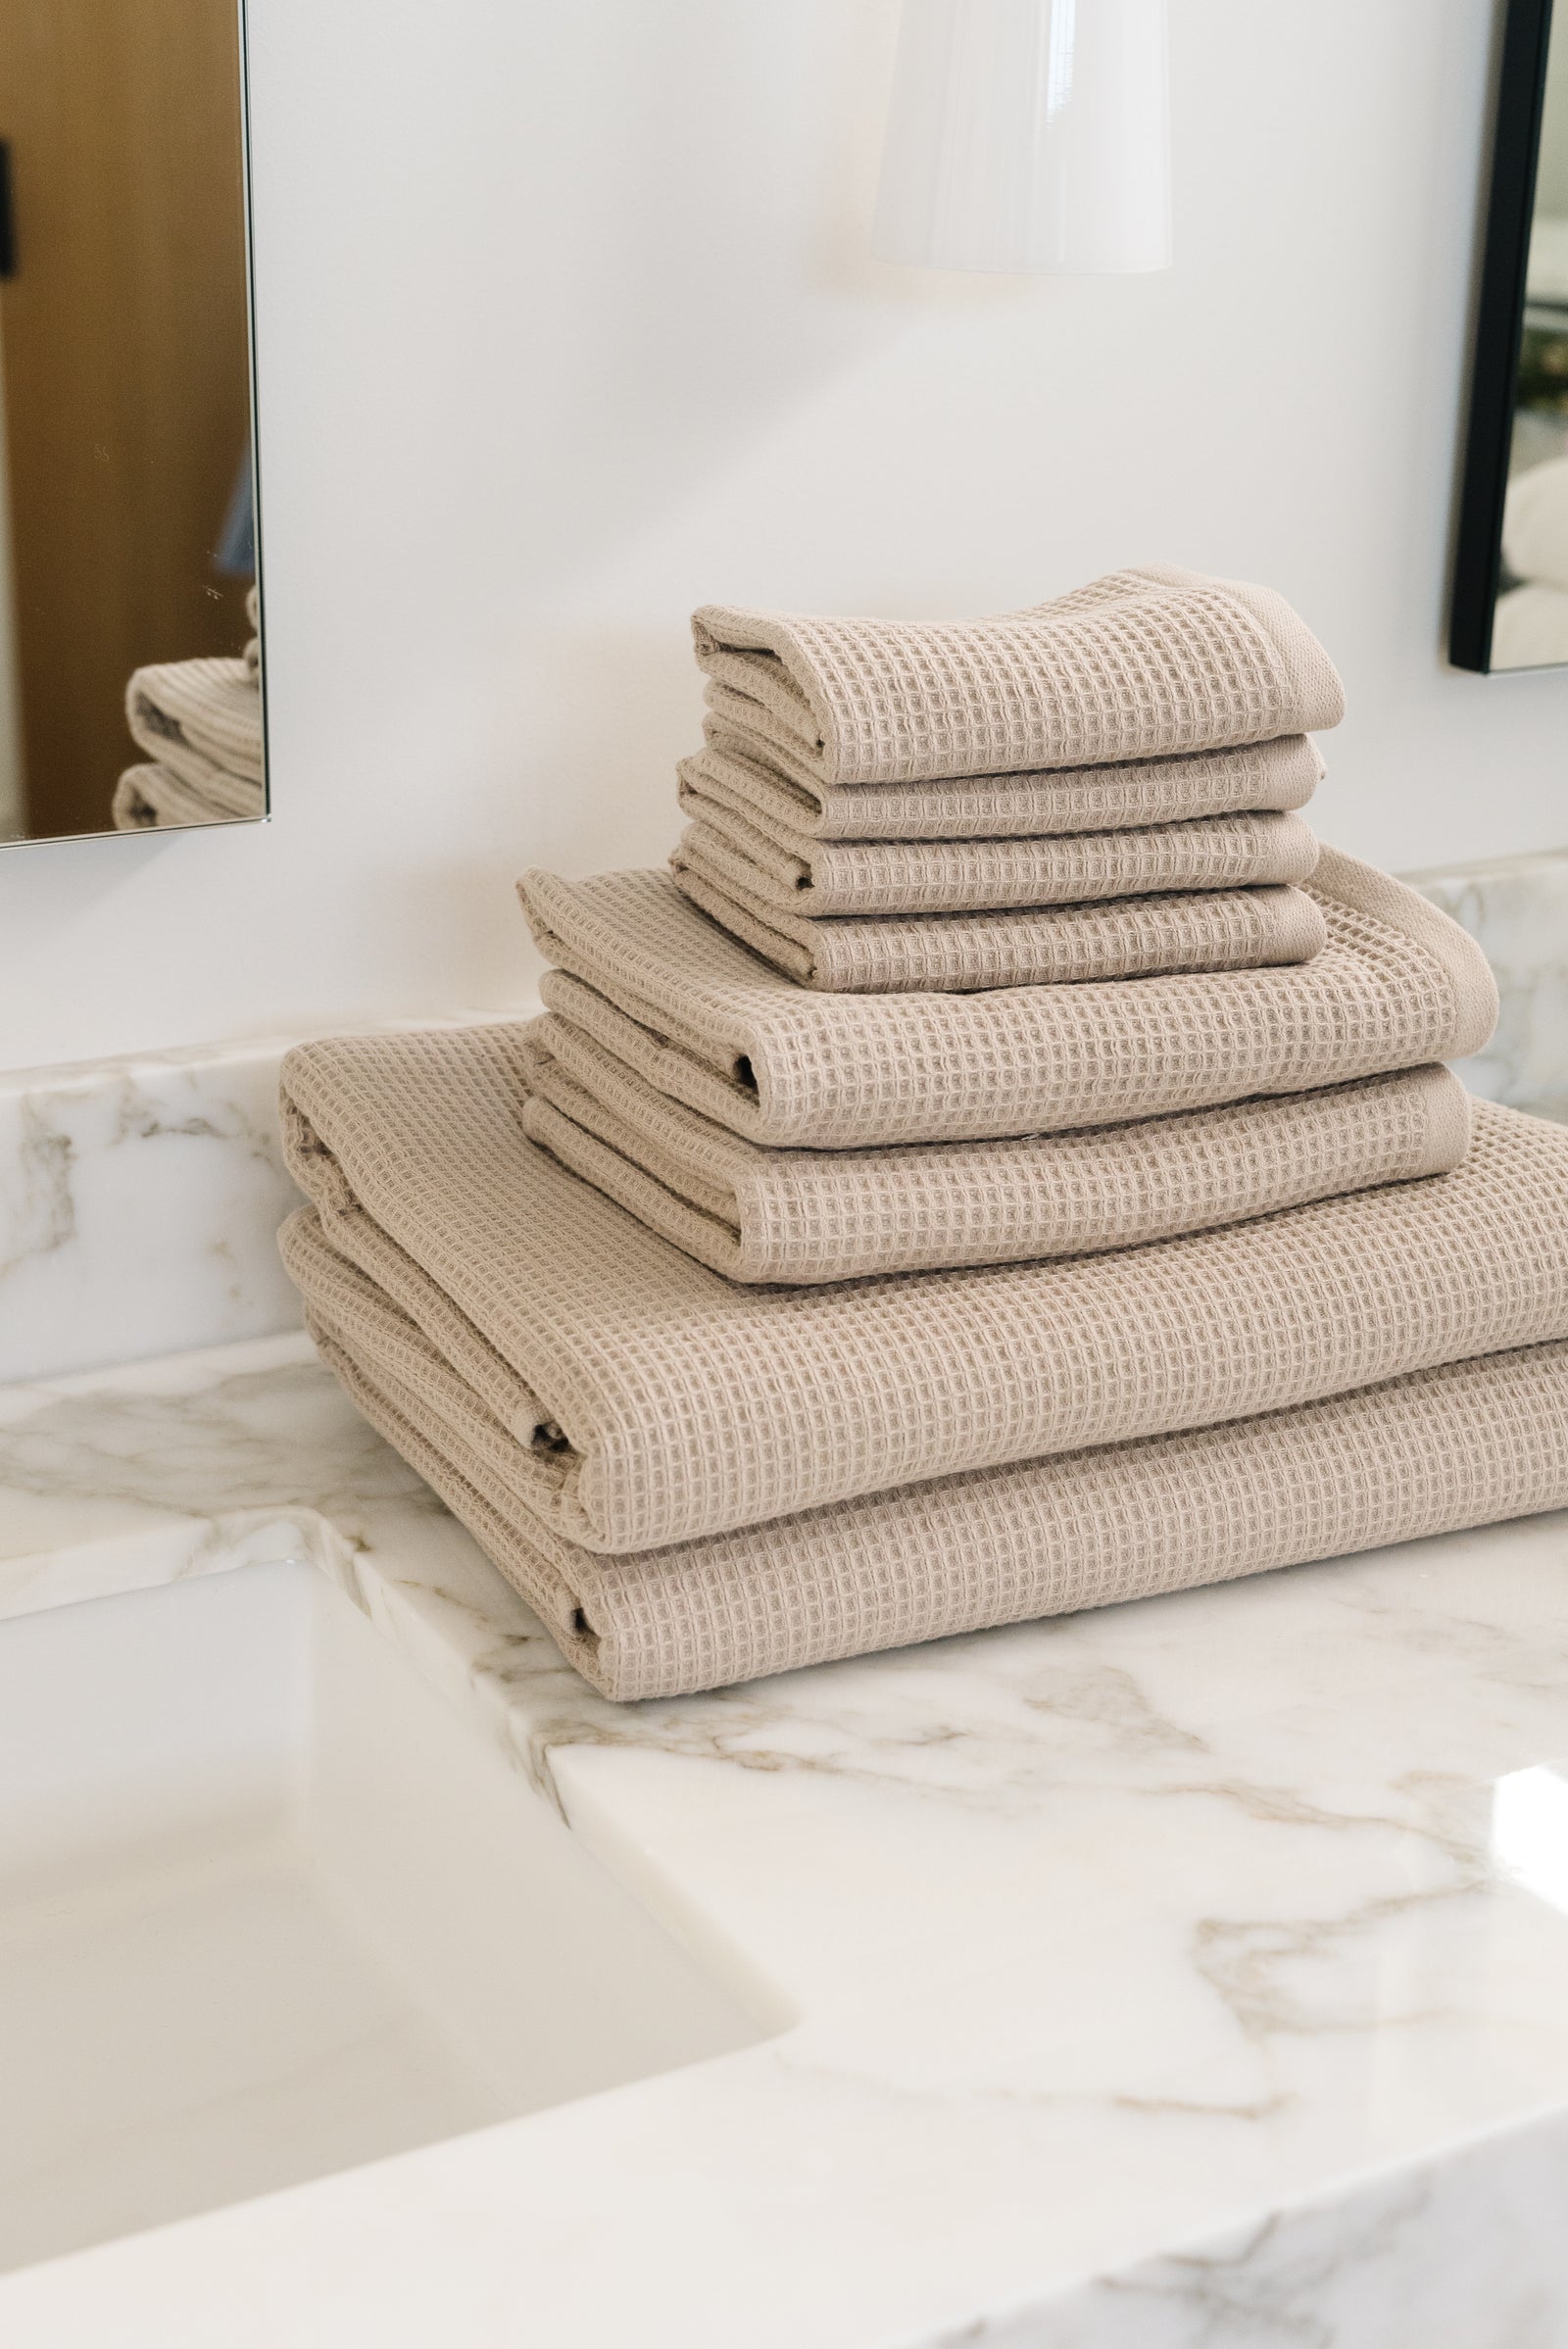 Waffle Bath Towel Set in the color Sand. Photo of Sand Waffle Bath Towel Set taken resting on a marble counter top. 